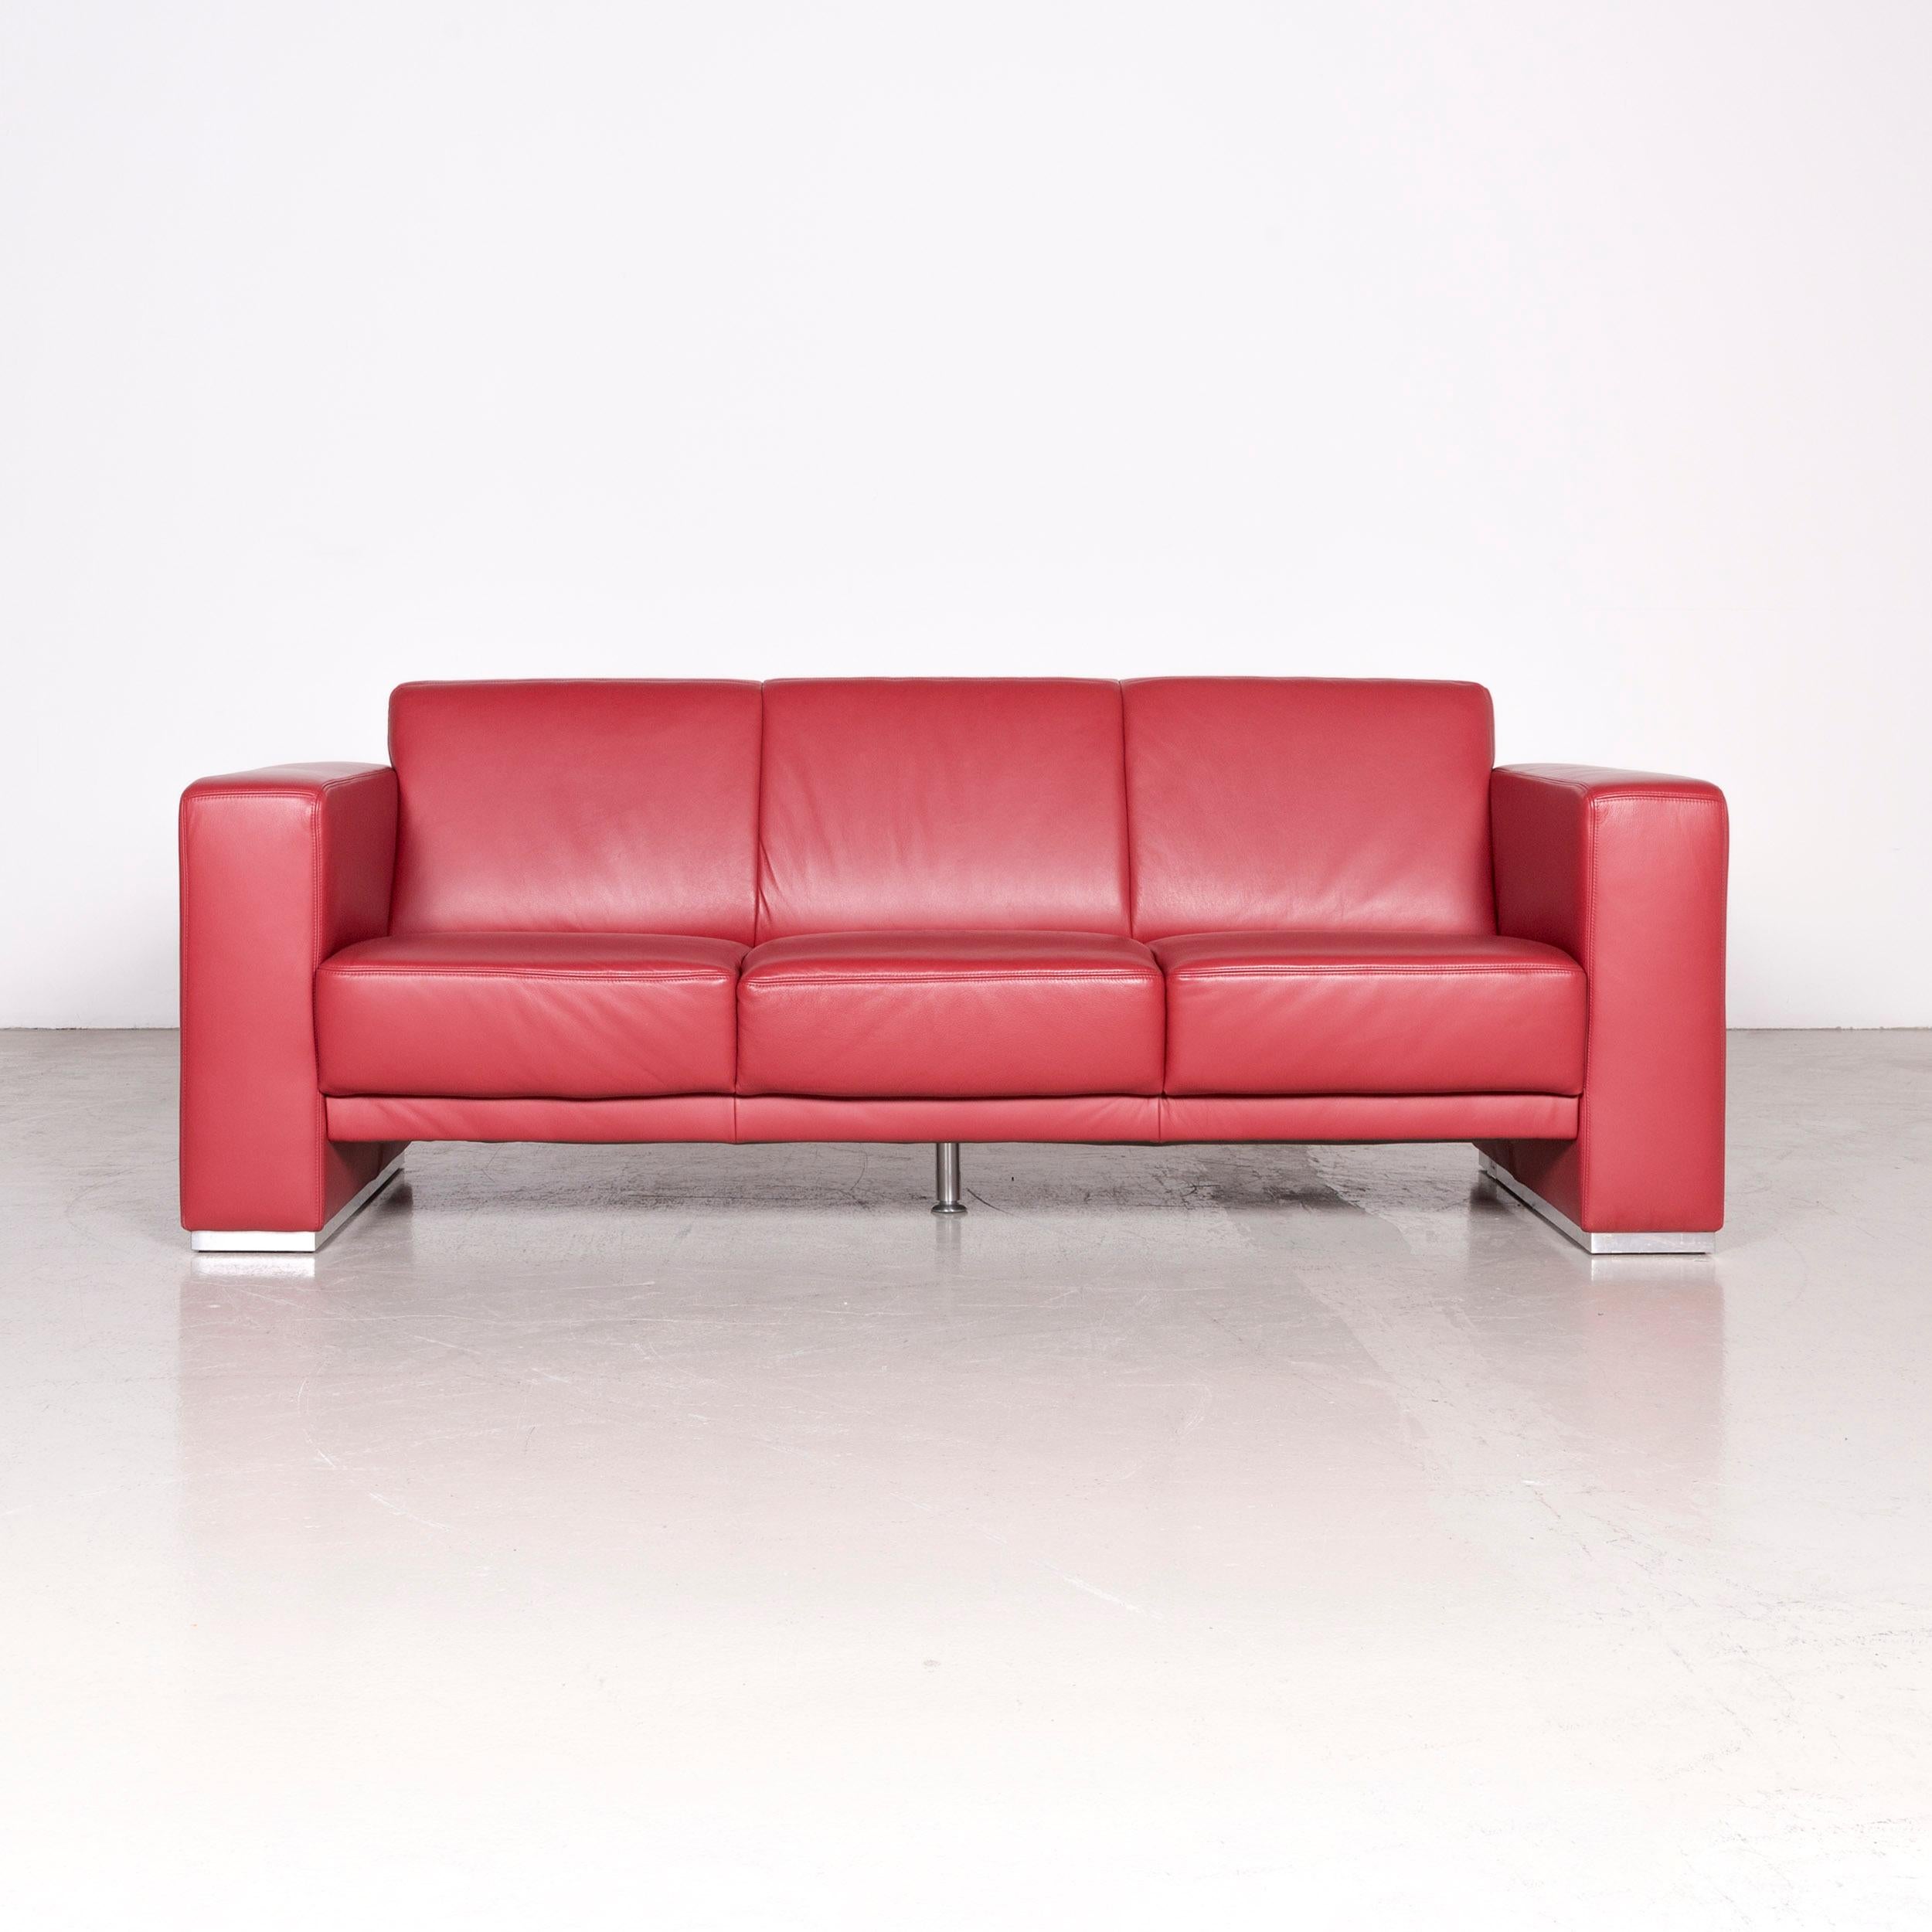 Koinor Nove designer leather sofa red two-seat couch.